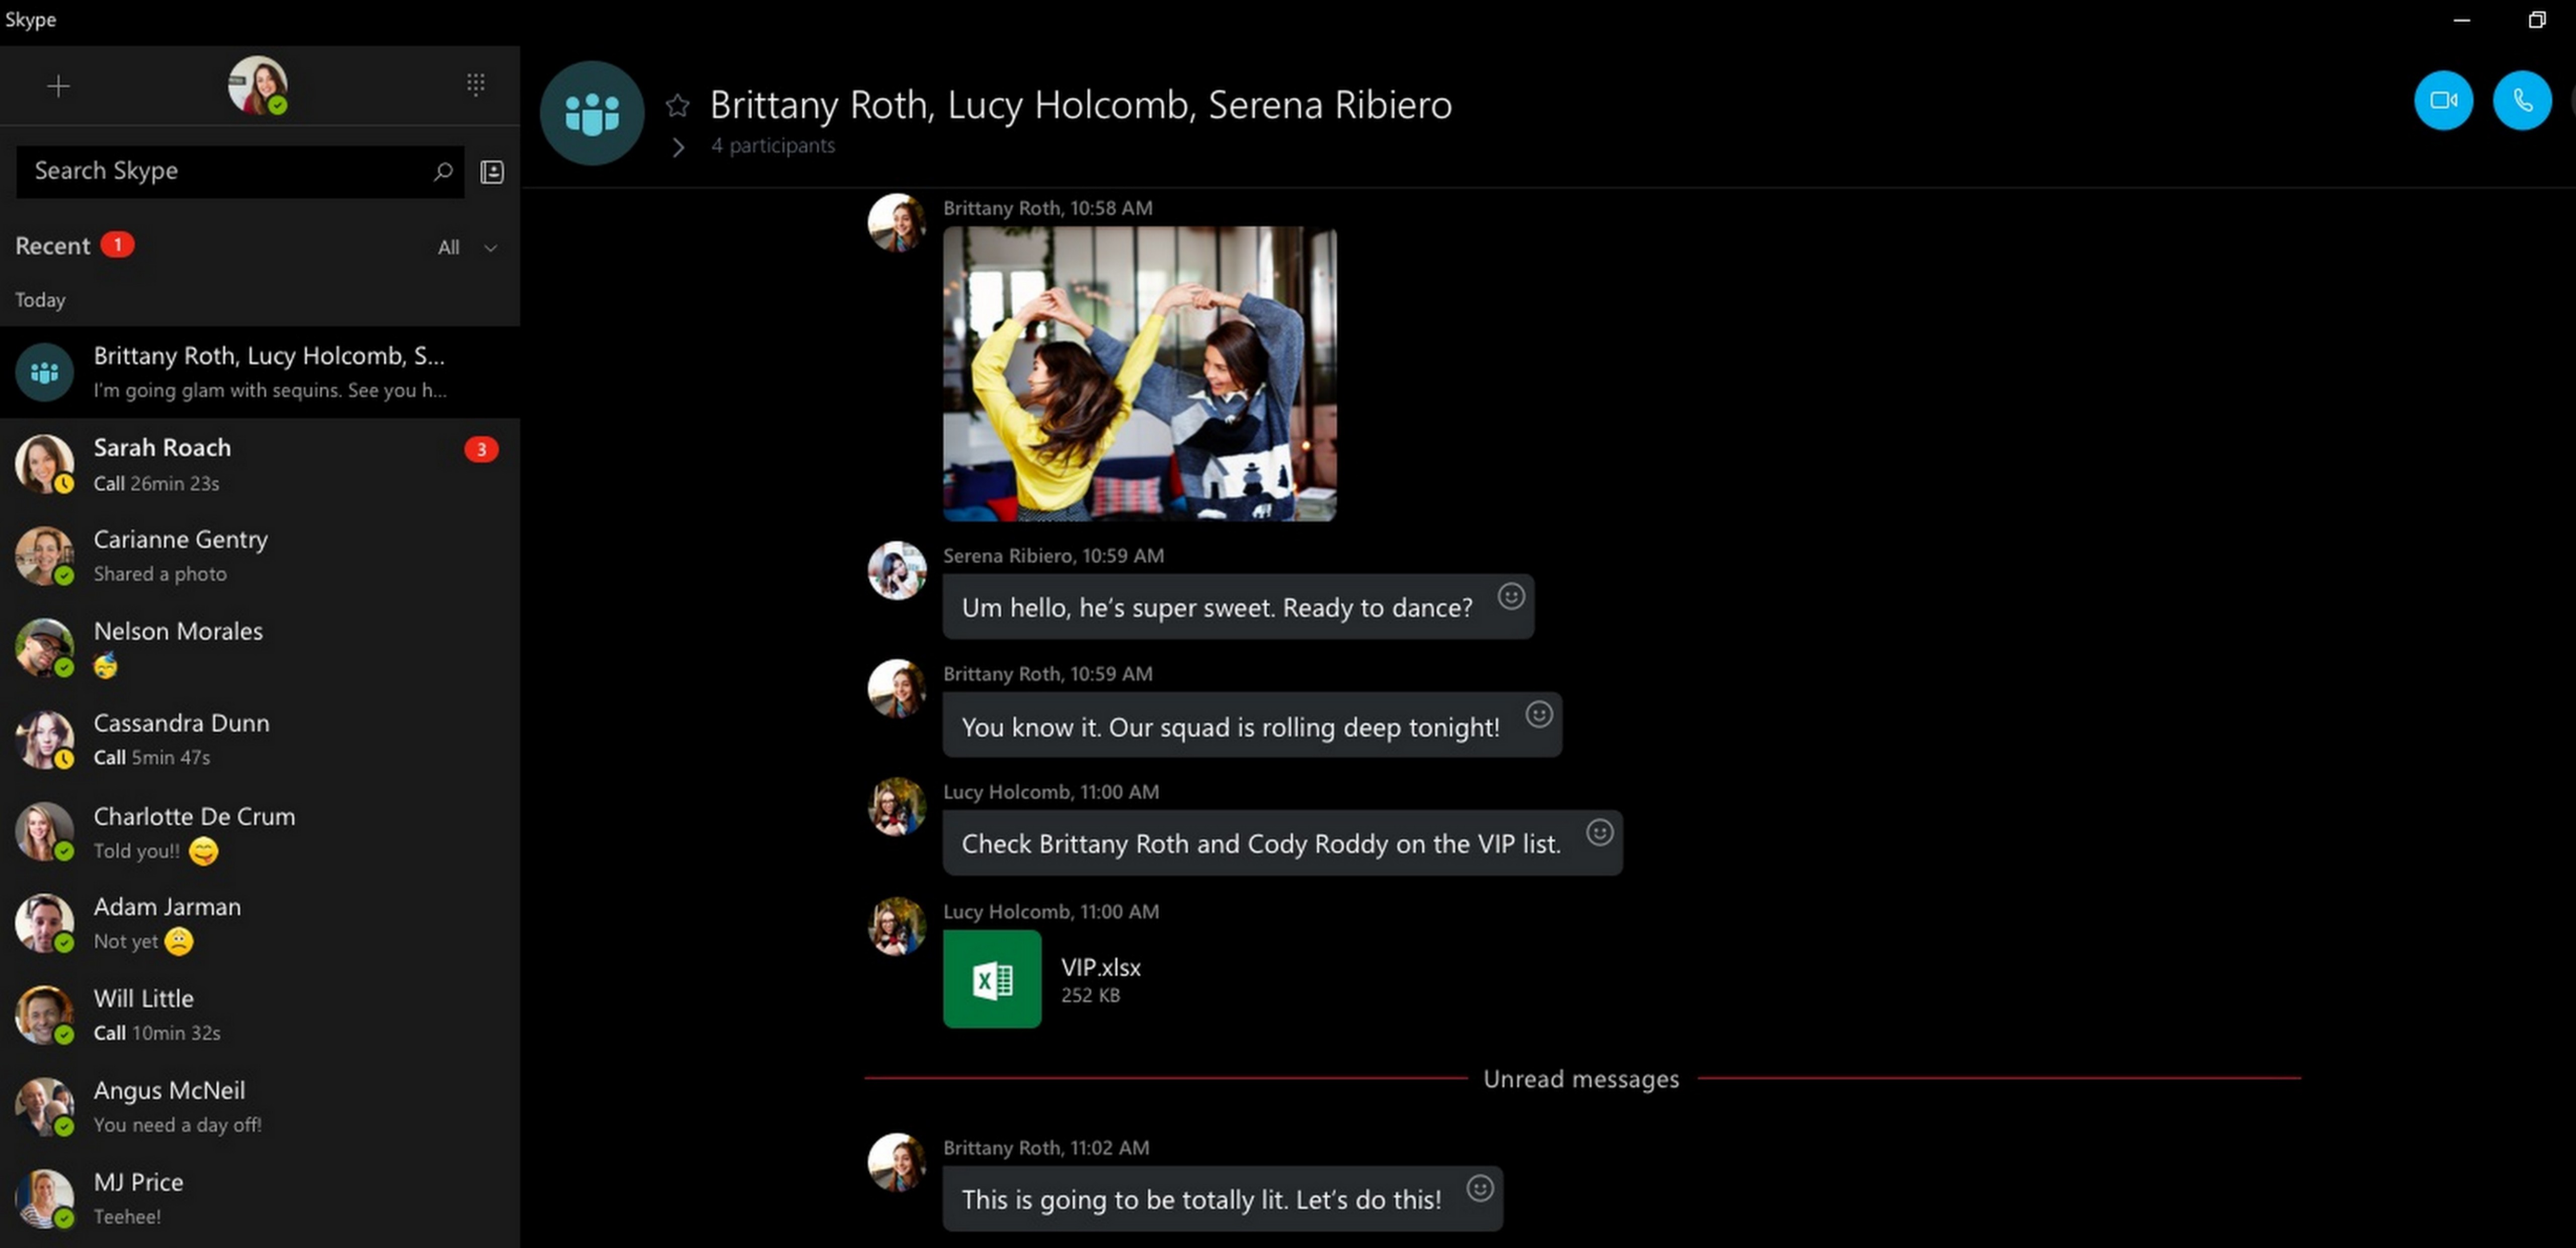 Here’s what’s new in the latest update to Skype on Windows 10